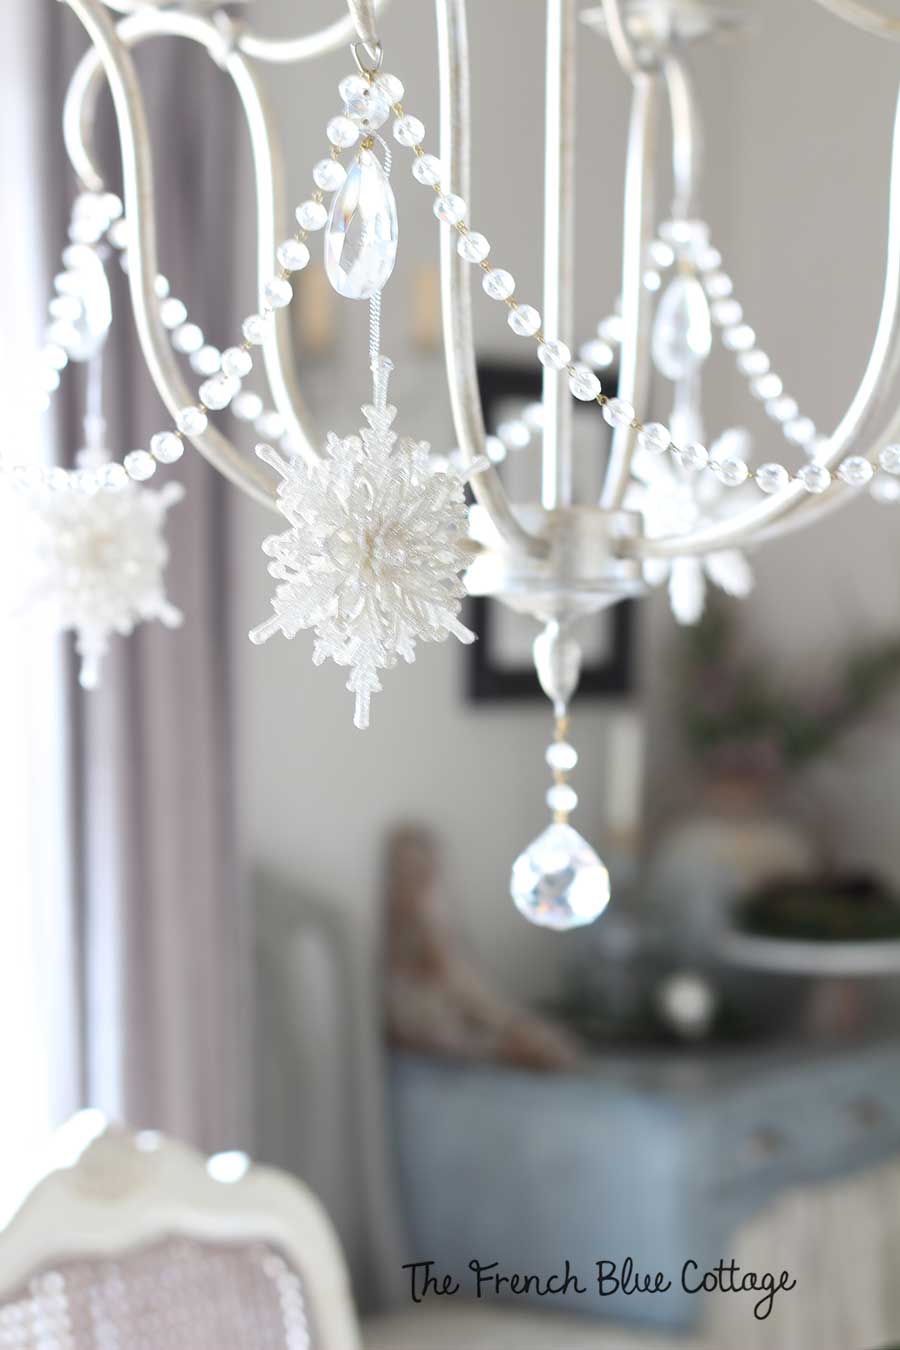 Glittery snowflakes on a chandelier for Christmas.